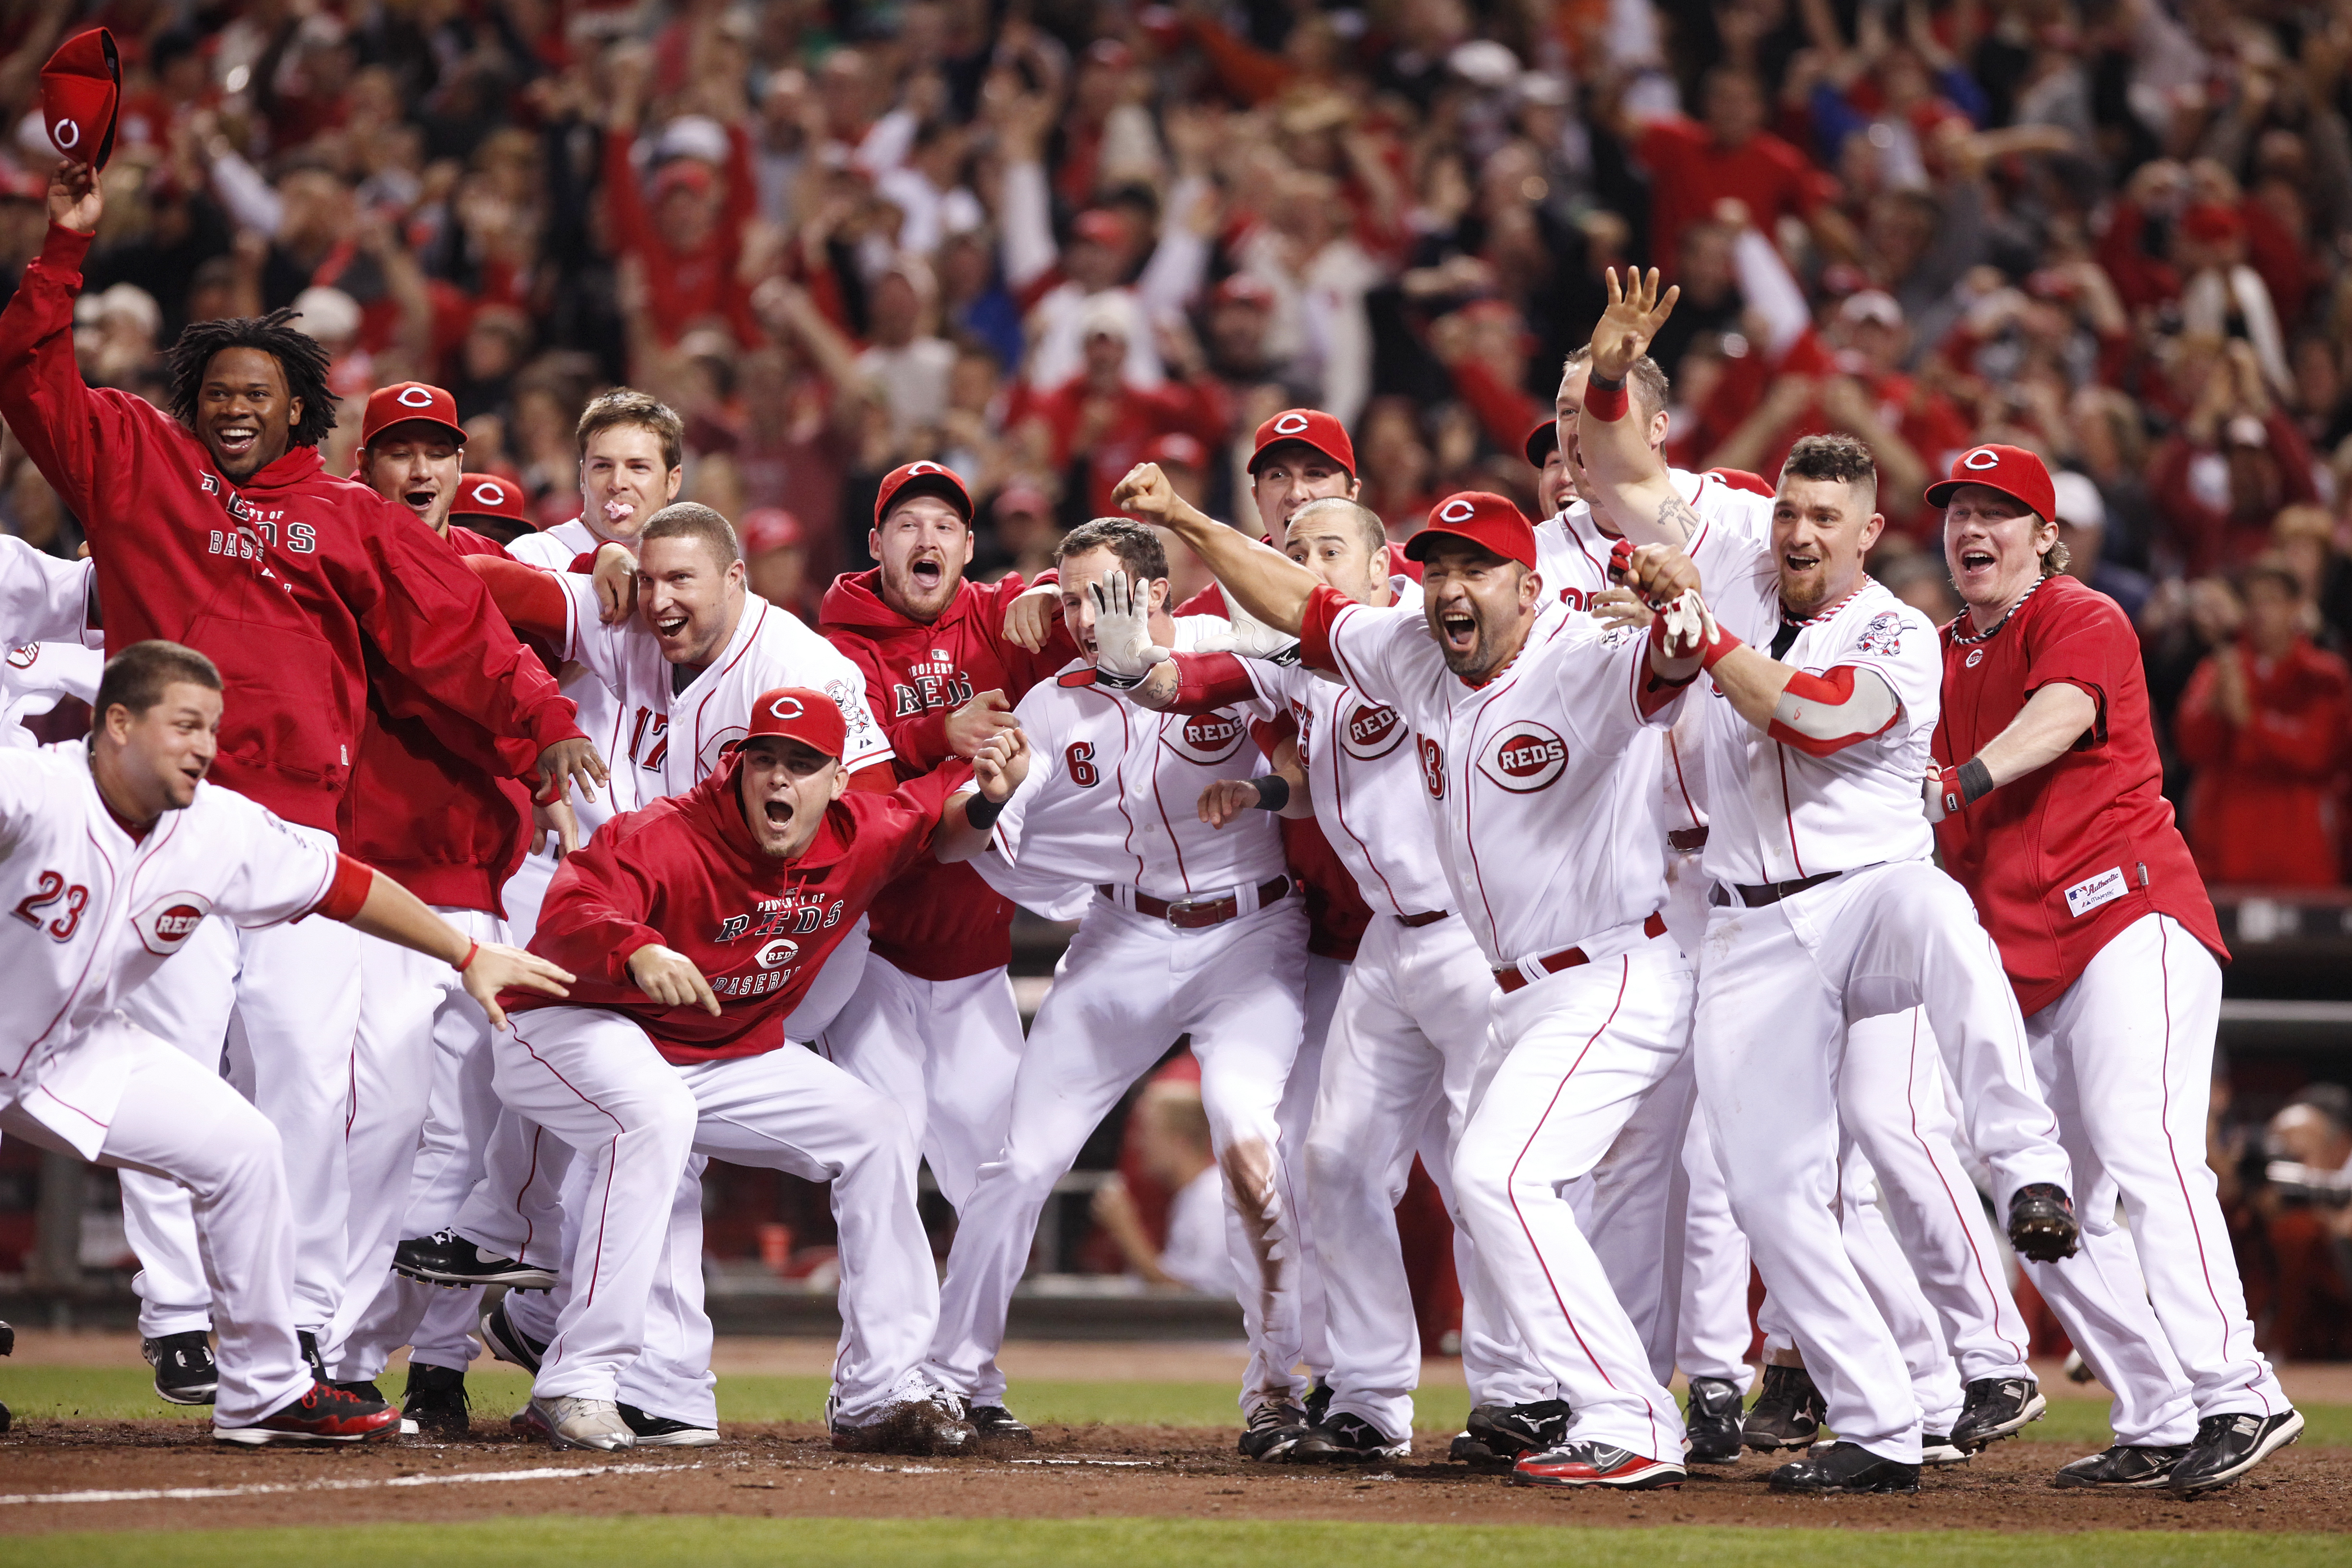 CINCINNATI, OH - SEPTEMBER 28: The Cincinnati Reds celebrate after Jay Bruce's walk off home run in the ninth inning against the Houston Astros at Great American Ball Park on September 28, 2010 in Cincinnati, Ohio. The Reds won 3-2 to clinch the NL Centra